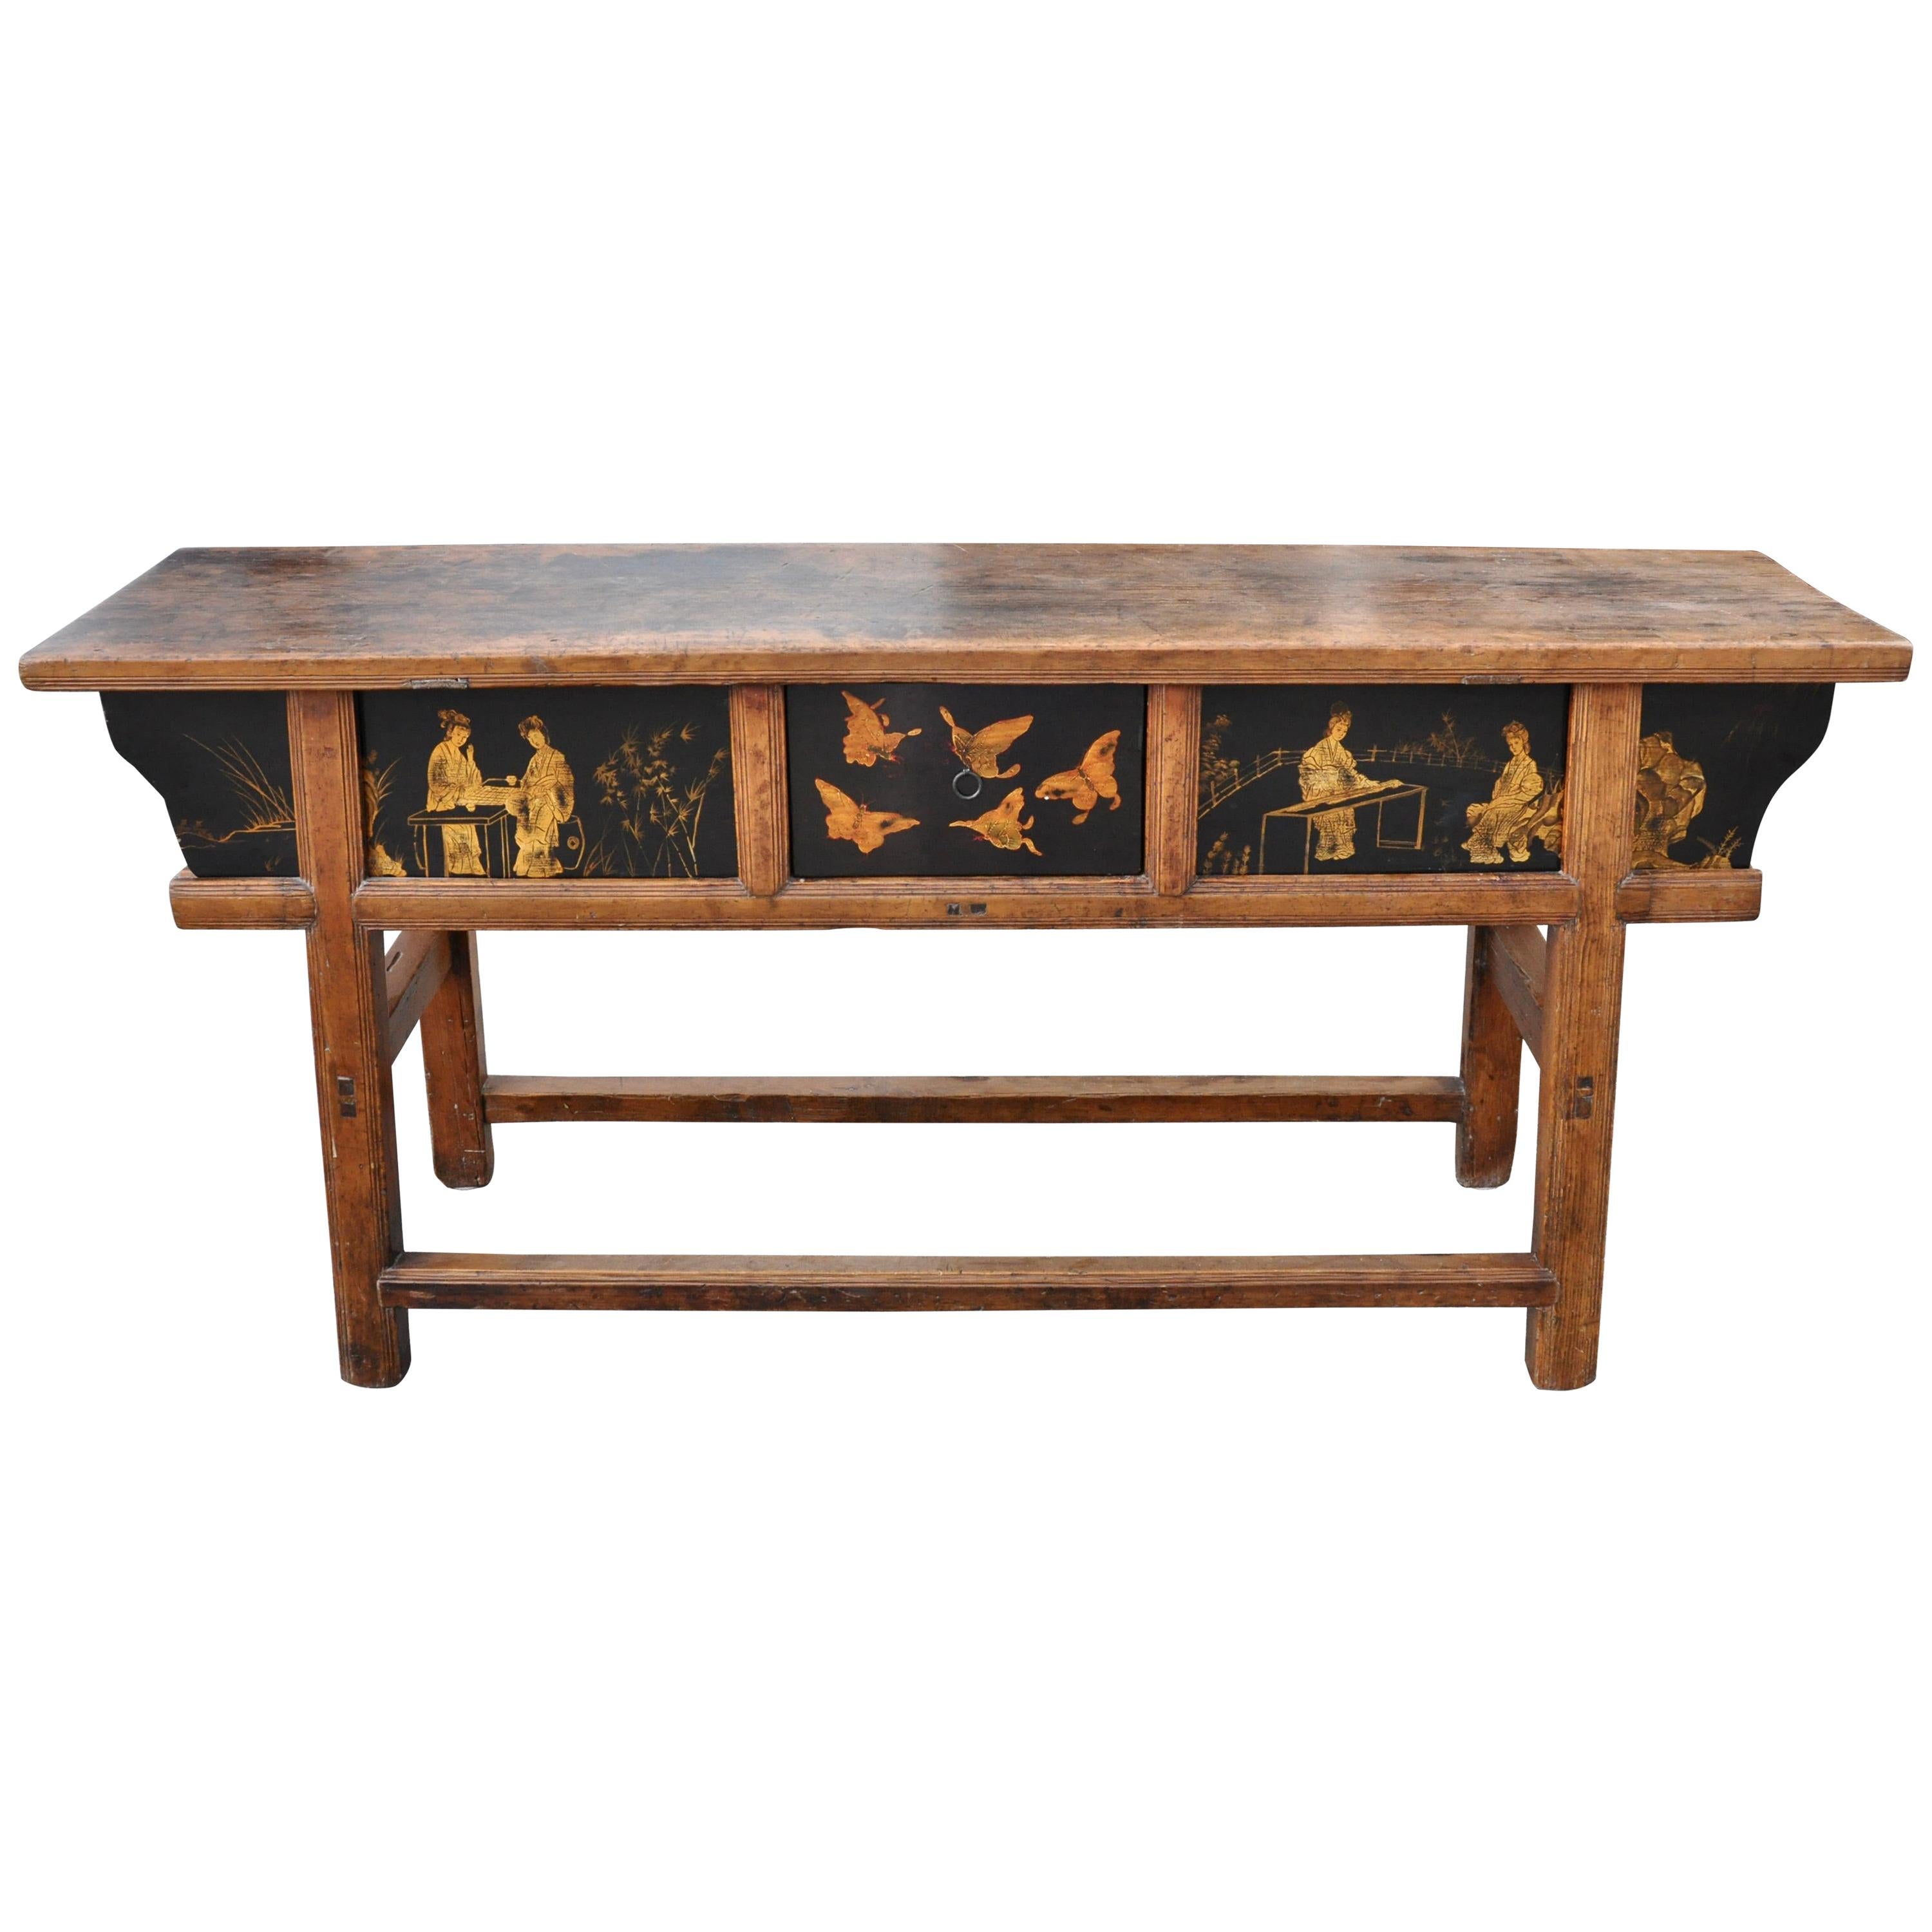 19th Century Chinese Farm Altar Table or Dongbei